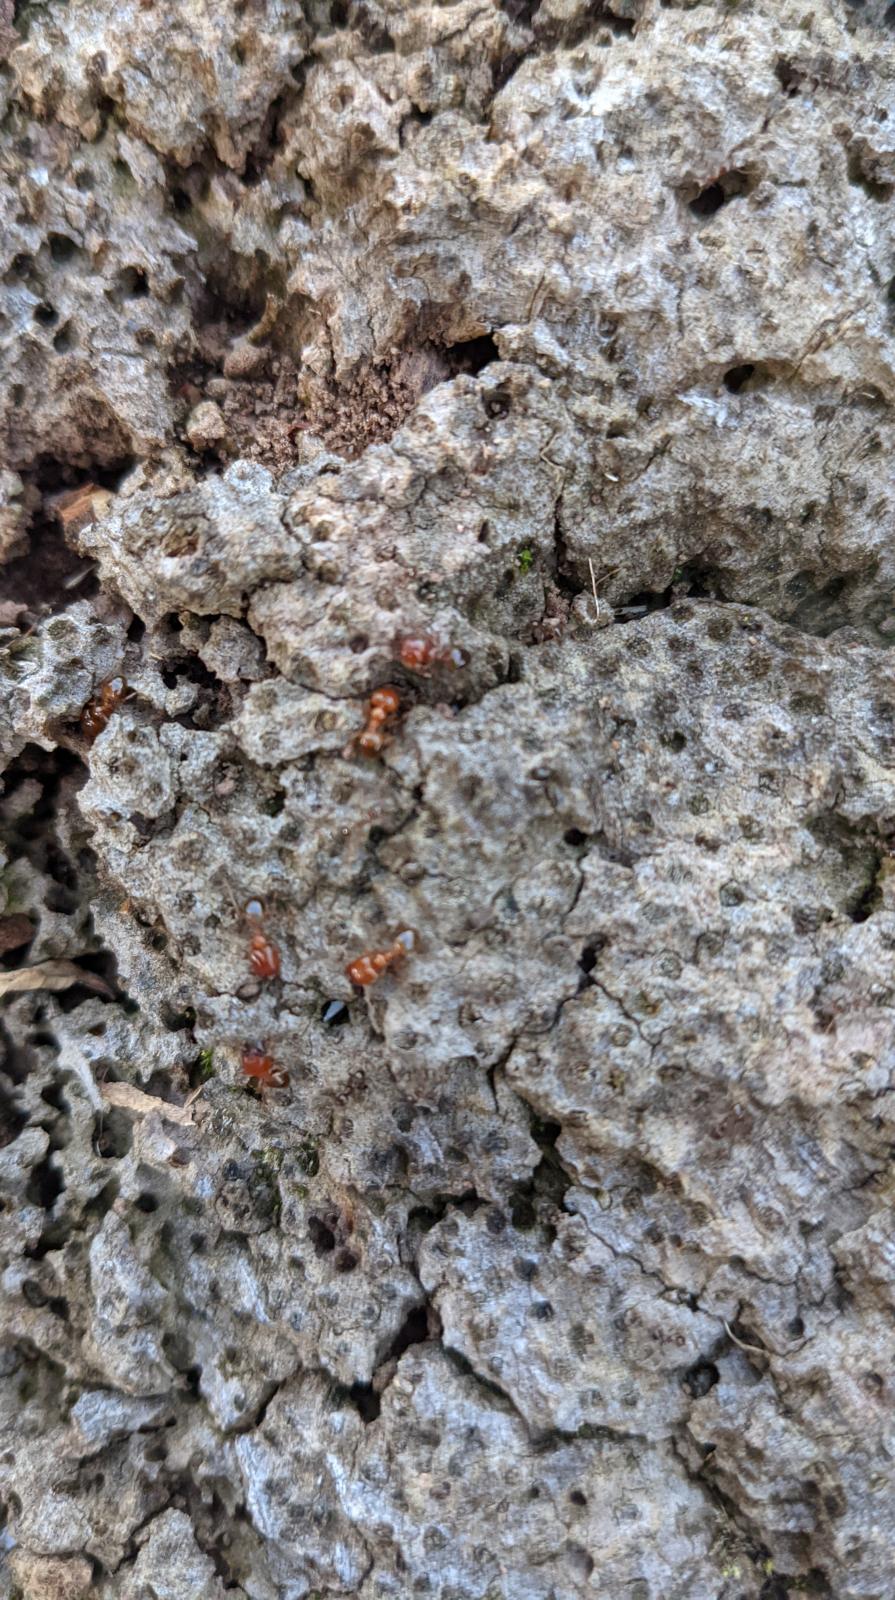 Are these Termites